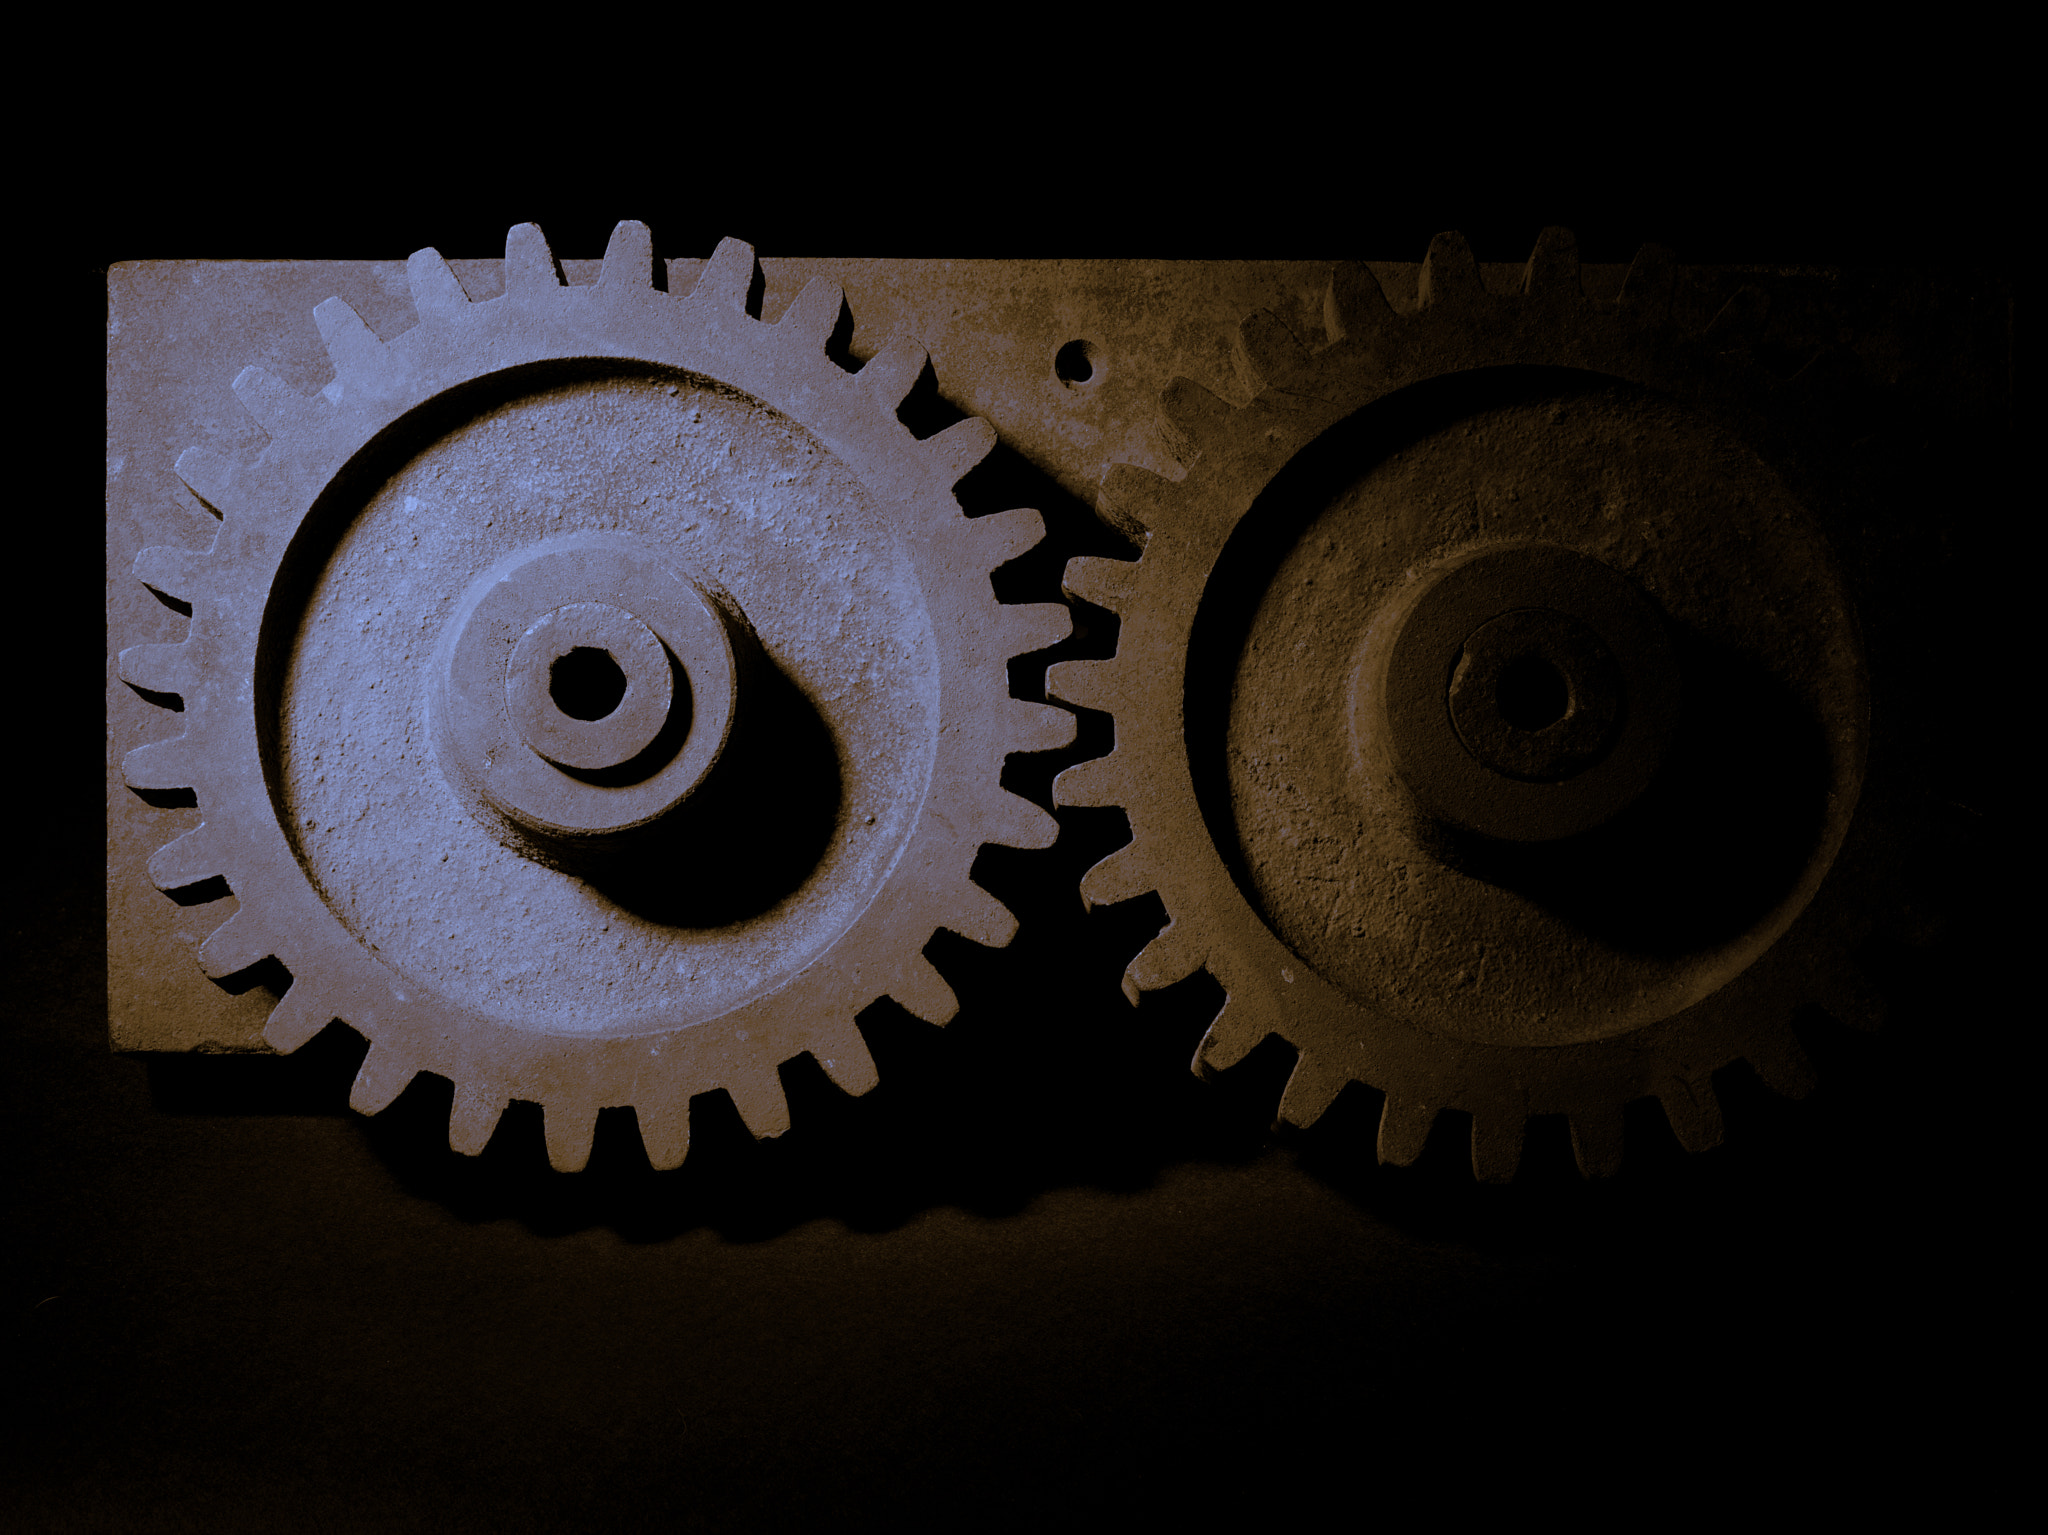 Phase One IQ140 sample photo. A study in lighting - old gears photography